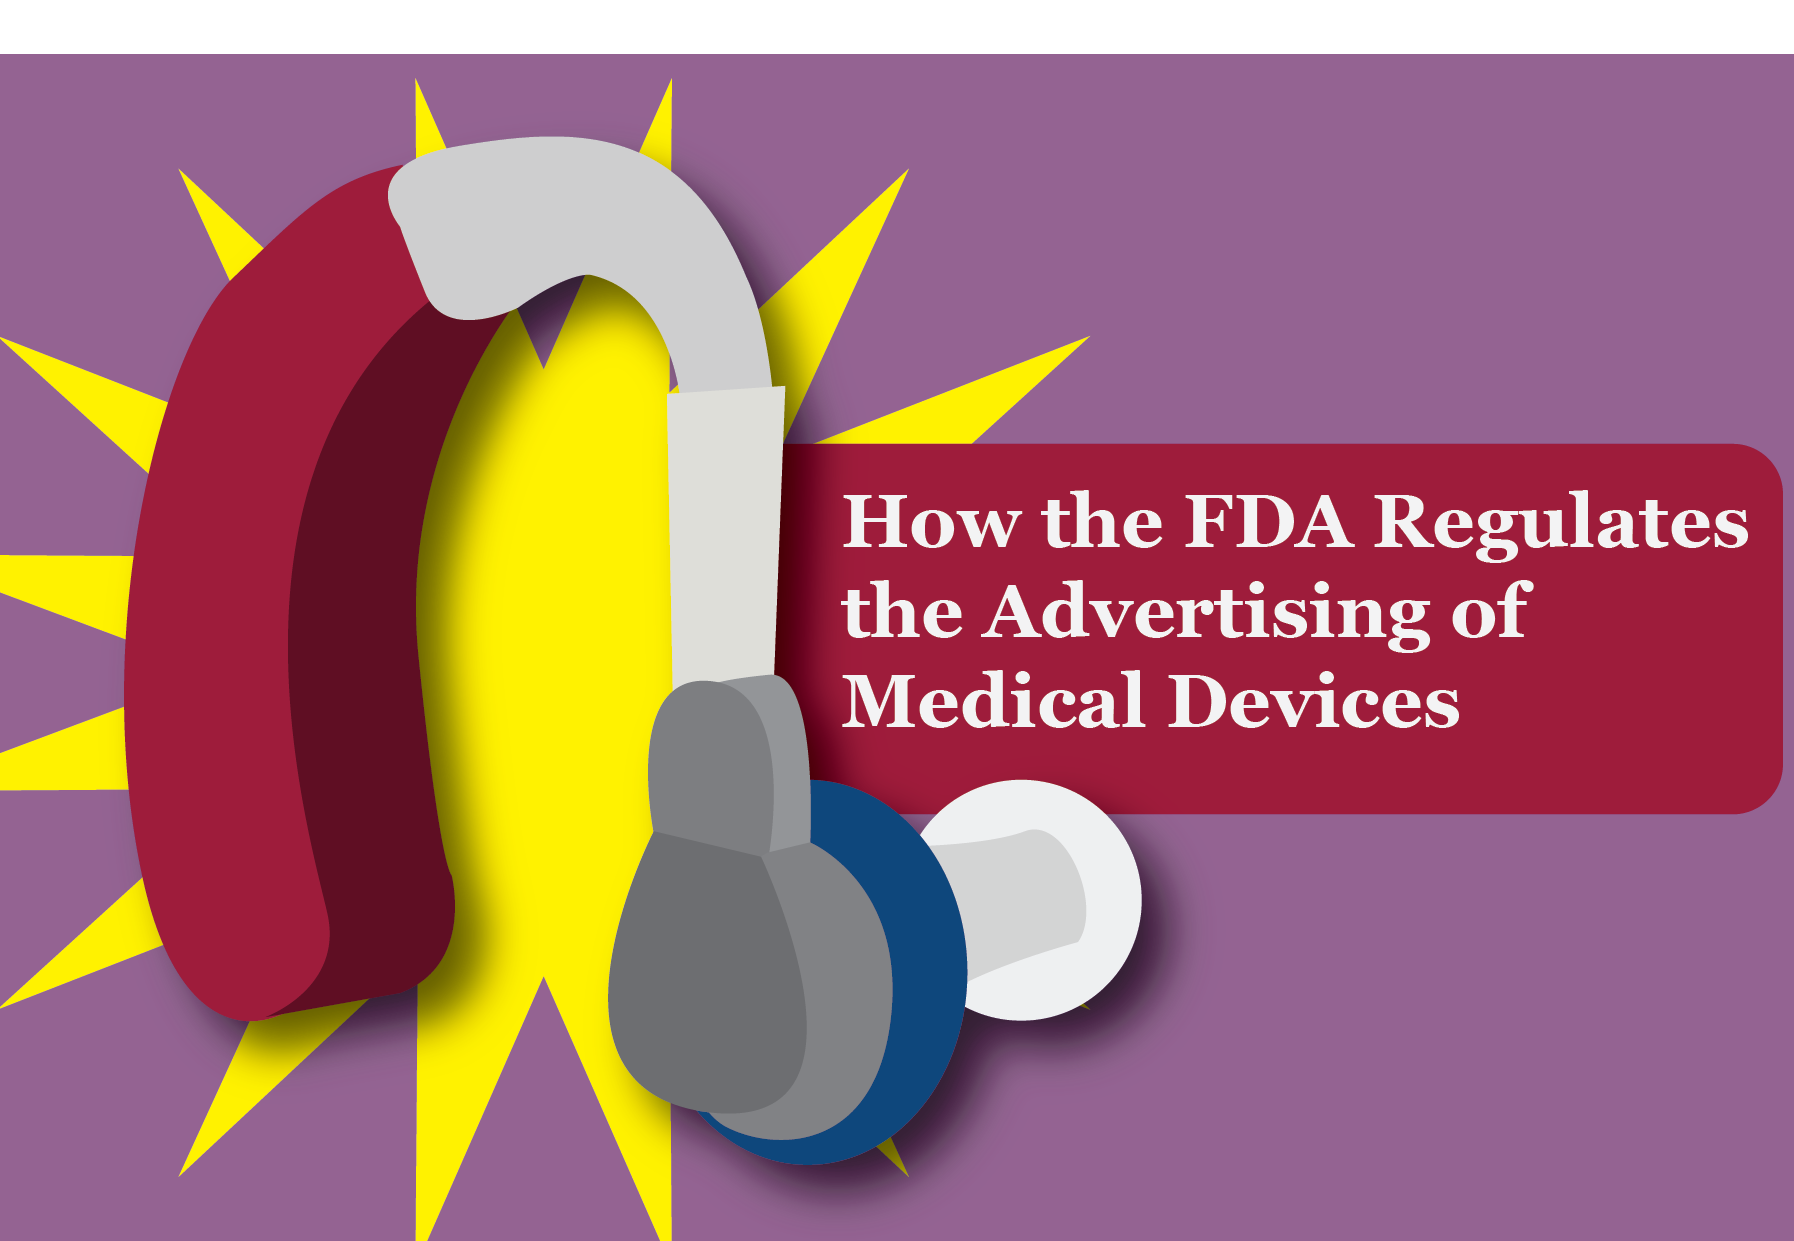 How the FDA Regulates the Advertising of Medical Devices